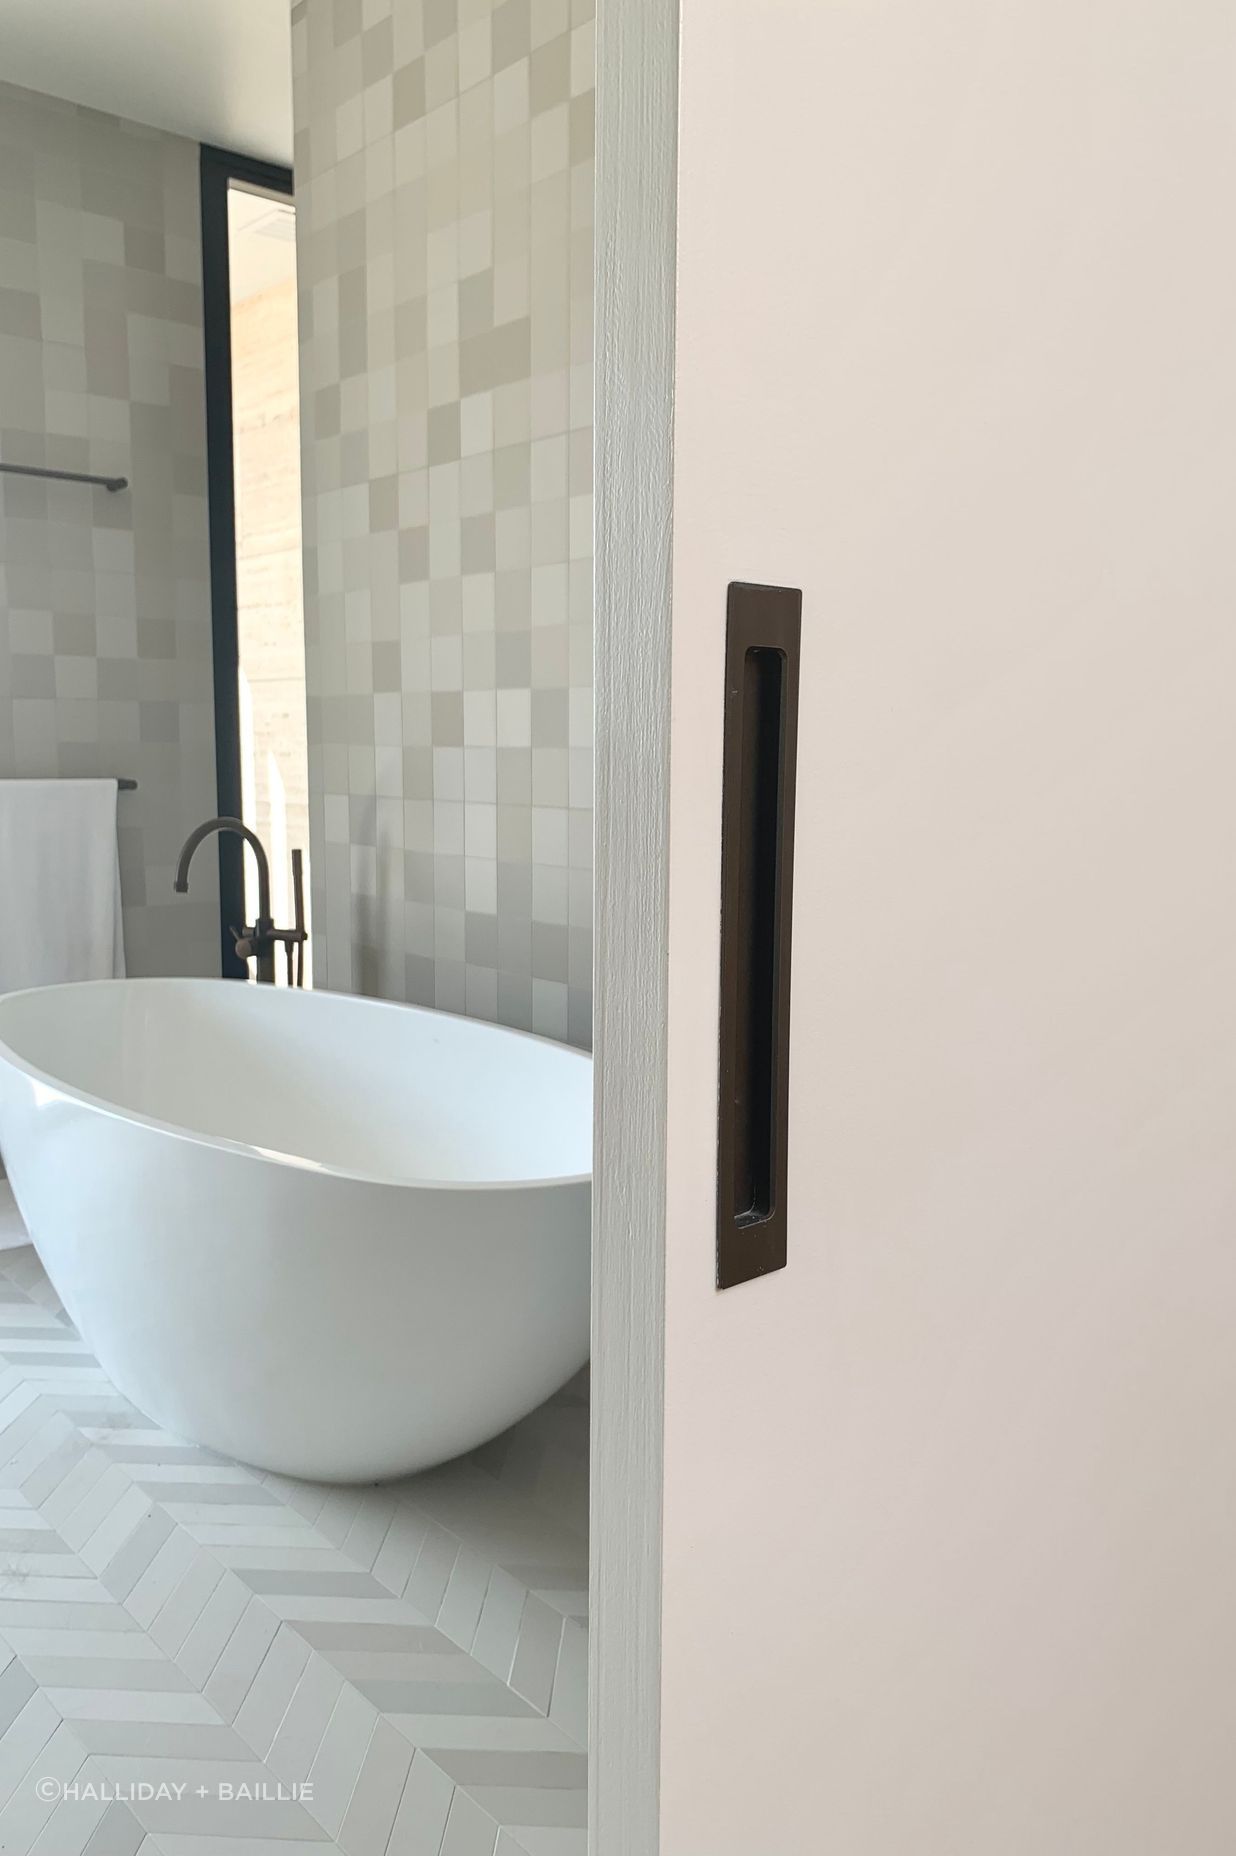 A flush pull handle adds clean lines to the bathroom sliding door